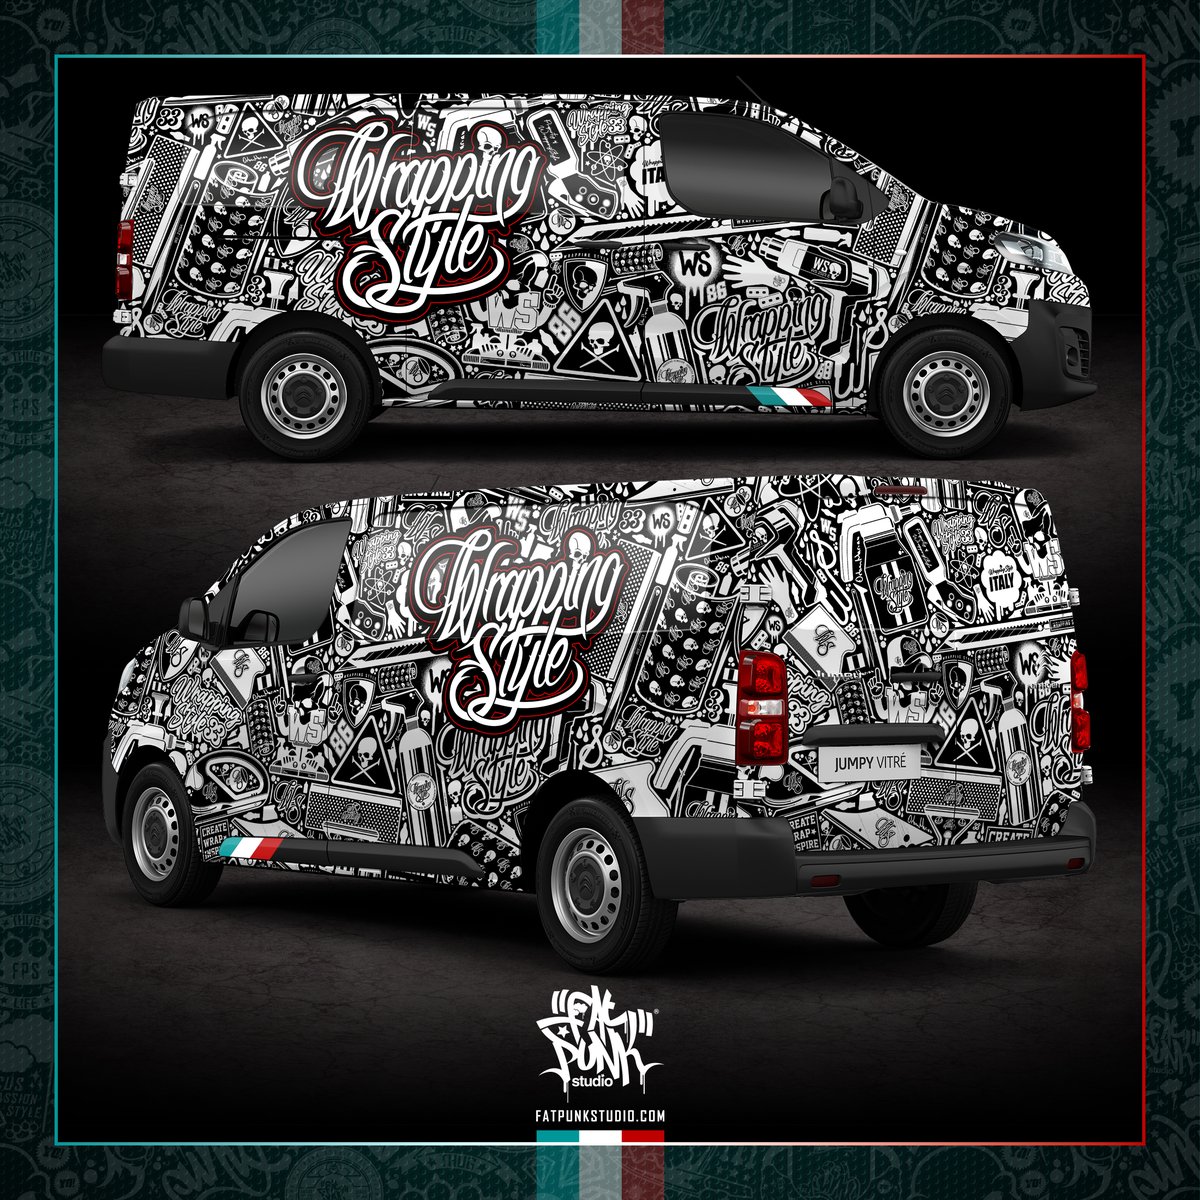 Street style ~ Check out the killer new #VinylWrap design for #WrappingStyle 🇮🇹 💀🇮🇹 What do u think Gloss or Matt wrap?
•
#FatPunkStudio #WrappingStyle #citroenjumpy #vinylwrapdesign #vinylwrapping #vinylwraps